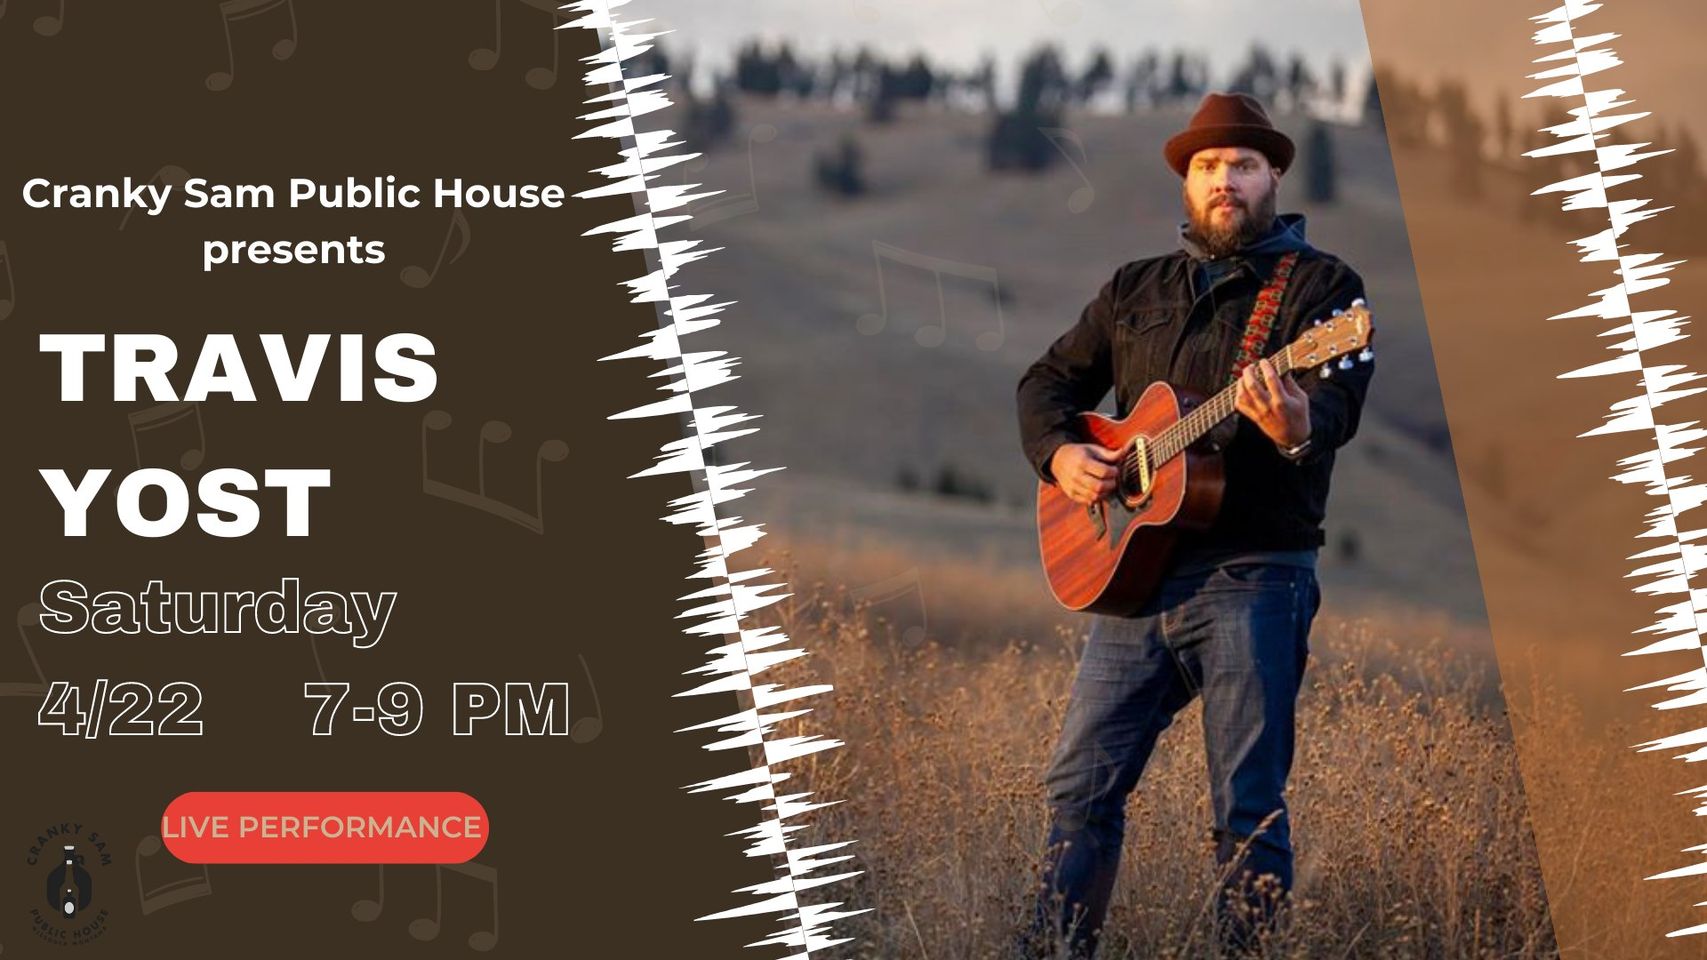 Travis Yost live at Cranky Sam Public House in Downtown Missoula, Montana